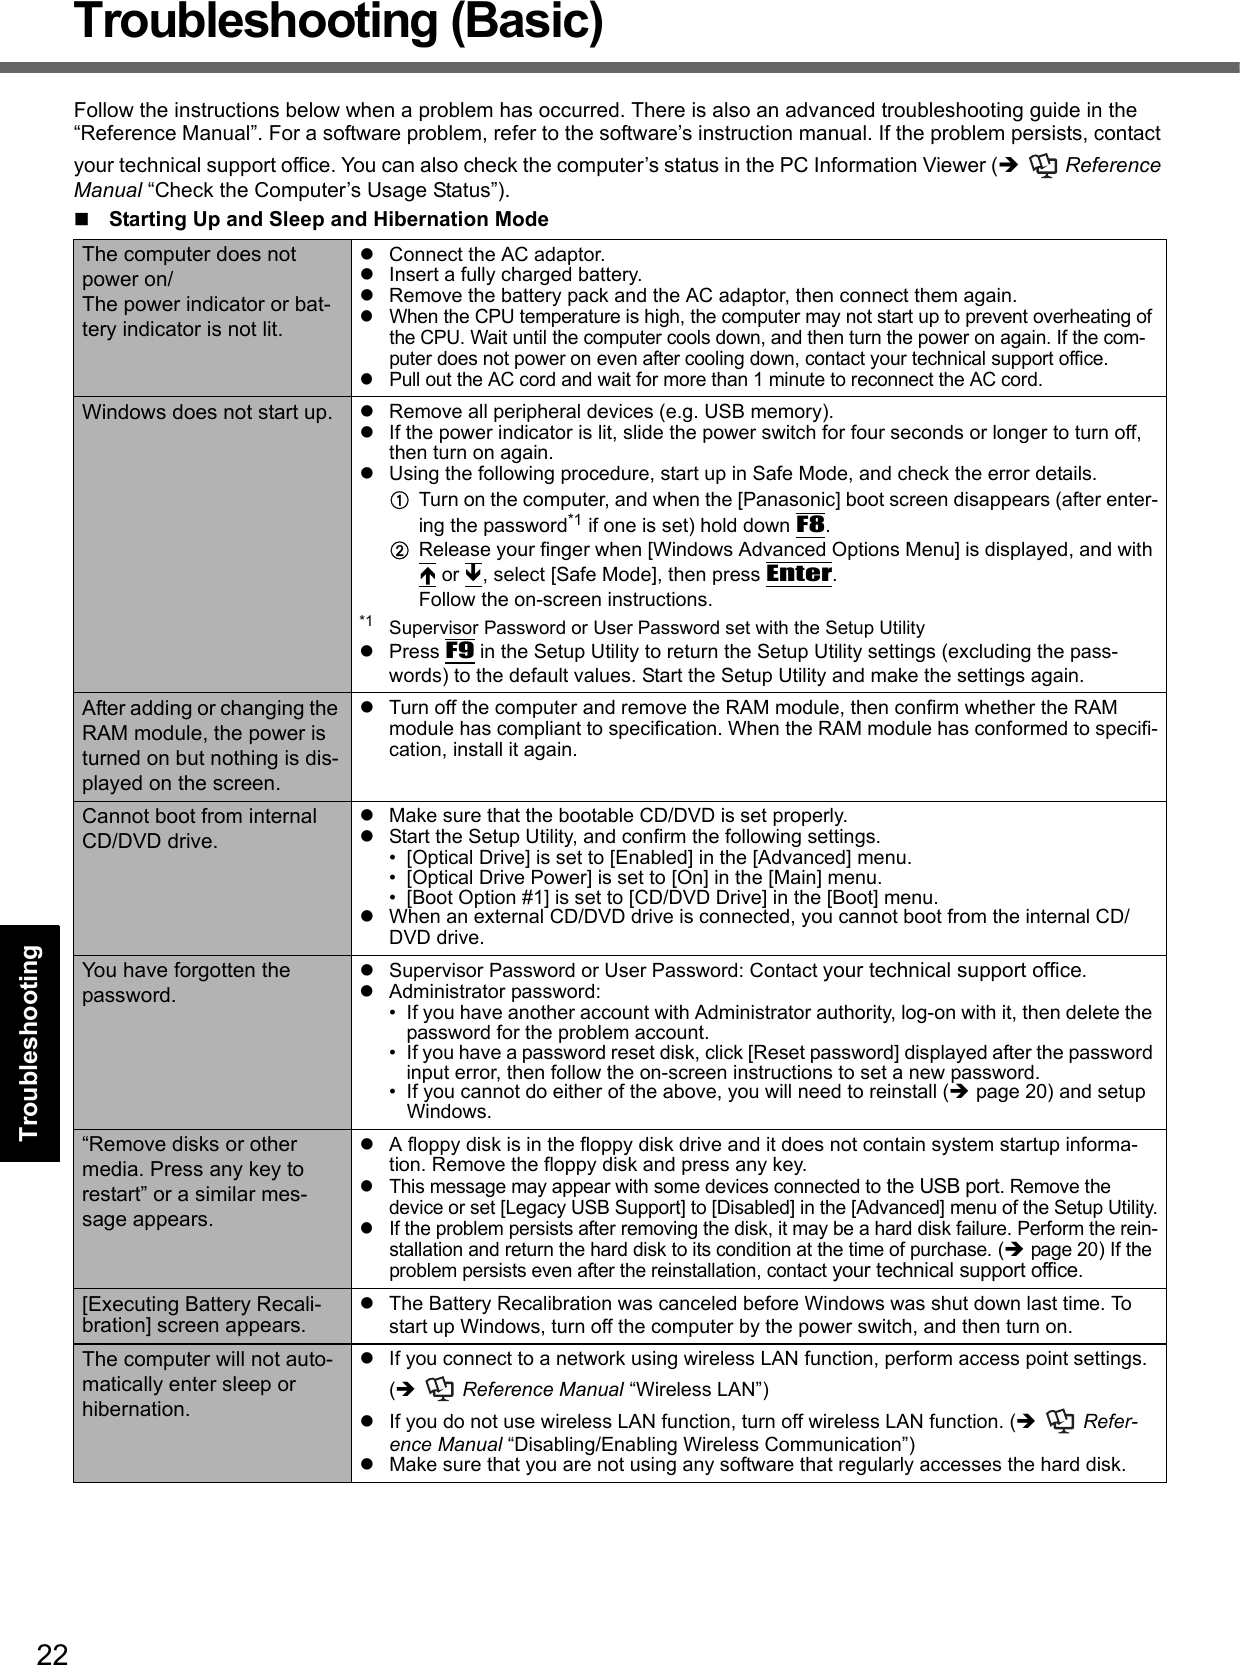 22Getting StartedUseful InformationTroubleshootingAppendixTroubleshooting (Basic)Follow the instructions below when a problem has occurred. There is also an advanced troubleshooting guide in the “Reference Manual”. For a software problem, refer to the software’s instruction manual. If the problem persists, contact your technical support office. You can also check the computer’s status in the PC Information Viewer (Î Reference Manual “Check the Computer’s Usage Status”).Starting Up and Sleep and Hibernation ModeThe computer does not power on/The power indicator or bat-tery indicator is not lit.zConnect the AC adaptor.zInsert a fully charged battery.zRemove the battery pack and the AC adaptor, then connect them again. zWhen the CPU temperature is high, the computer may not start up to prevent overheating of the CPU. Wait until the computer cools down, and then turn the power on again. If the com-puter does not power on even after cooling down, contact your technical support office.zPull out the AC cord and wait for more than 1 minute to reconnect the AC cord.Windows does not start up. zRemove all peripheral devices (e.g. USB memory).zIf the power indicator is lit, slide the power switch for four seconds or longer to turn off, then turn on again.zUsing the following procedure, start up in Safe Mode, and check the error details.ATurn on the computer, and when the [Panasonic] boot screen disappears (after enter-ing the password*1 if one is set) hold down F8.BRelease your finger when [Windows Advanced Options Menu] is displayed, and with Ï or Ð, select [Safe Mode], then press Enter.Follow the on-screen instructions.*1 Supervisor Password or User Password set with the Setup UtilityzPress F9 in the Setup Utility to return the Setup Utility settings (excluding the pass-words) to the default values. Start the Setup Utility and make the settings again.After adding or changing the RAM module, the power is turned on but nothing is dis-played on the screen.zTurn off the computer and remove the RAM module, then confirm whether the RAM module has compliant to specification. When the RAM module has conformed to specifi-cation, install it again.Cannot boot from internal CD/DVD drive.zMake sure that the bootable CD/DVD is set properly.zStart the Setup Utility, and confirm the following settings.• [Optical Drive] is set to [Enabled] in the [Advanced] menu.• [Optical Drive Power] is set to [On] in the [Main] menu.• [Boot Option #1] is set to [CD/DVD Drive] in the [Boot] menu.zWhen an external CD/DVD drive is connected, you cannot boot from the internal CD/DVD drive.You have forgotten the password.zSupervisor Password or User Password: Contact your technical support office.zAdministrator password: • If you have another account with Administrator authority, log-on with it, then delete the password for the problem account.• If you have a password reset disk, click [Reset password] displayed after the password input error, then follow the on-screen instructions to set a new password.• If you cannot do either of the above, you will need to reinstall (Îpage 20) and setup Windows.“Remove disks or other media. Press any key to restart” or a similar mes-sage appears.zA floppy disk is in the floppy disk drive and it does not contain system startup informa-tion. Remove the floppy disk and press any key.zThis message may appear with some devices connected to the USB port. Remove the device or set [Legacy USB Support] to [Disabled] in the [Advanced] menu of the Setup Utility.zIf the problem persists after removing the disk, it may be a hard disk failure. Perform the rein-stallation and return the hard disk to its condition at the time of purchase. (Îpage 20) If the problem persists even after the reinstallation, contact your technical support office.[Executing Battery Recali-bration] screen appears.zThe Battery Recalibration was canceled before Windows was shut down last time. To start up Windows, turn off the computer by the power switch, and then turn on.The computer will not auto-matically enter sleep or hibernation.zIf you connect to a network using wireless LAN function, perform access point settings. (Î Reference Manual “Wireless LAN”)zIf you do not use wireless LAN function, turn off wireless LAN function. (Î Refer-ence Manual “Disabling/Enabling Wireless Communication”)zMake sure that you are not using any software that regularly accesses the hard disk.